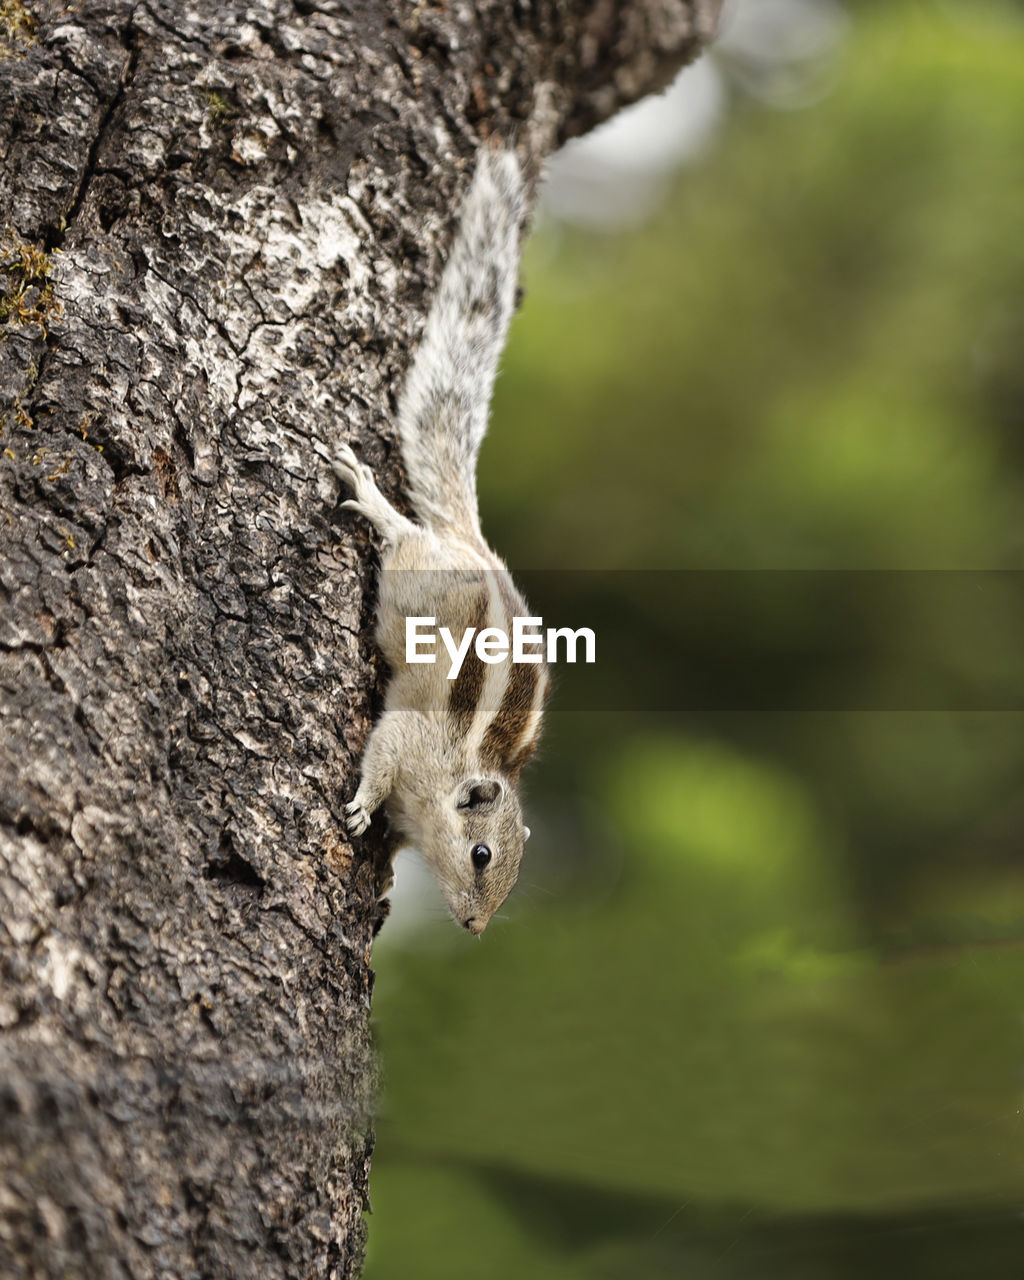 VIEW OF SQUIRREL ON TREE